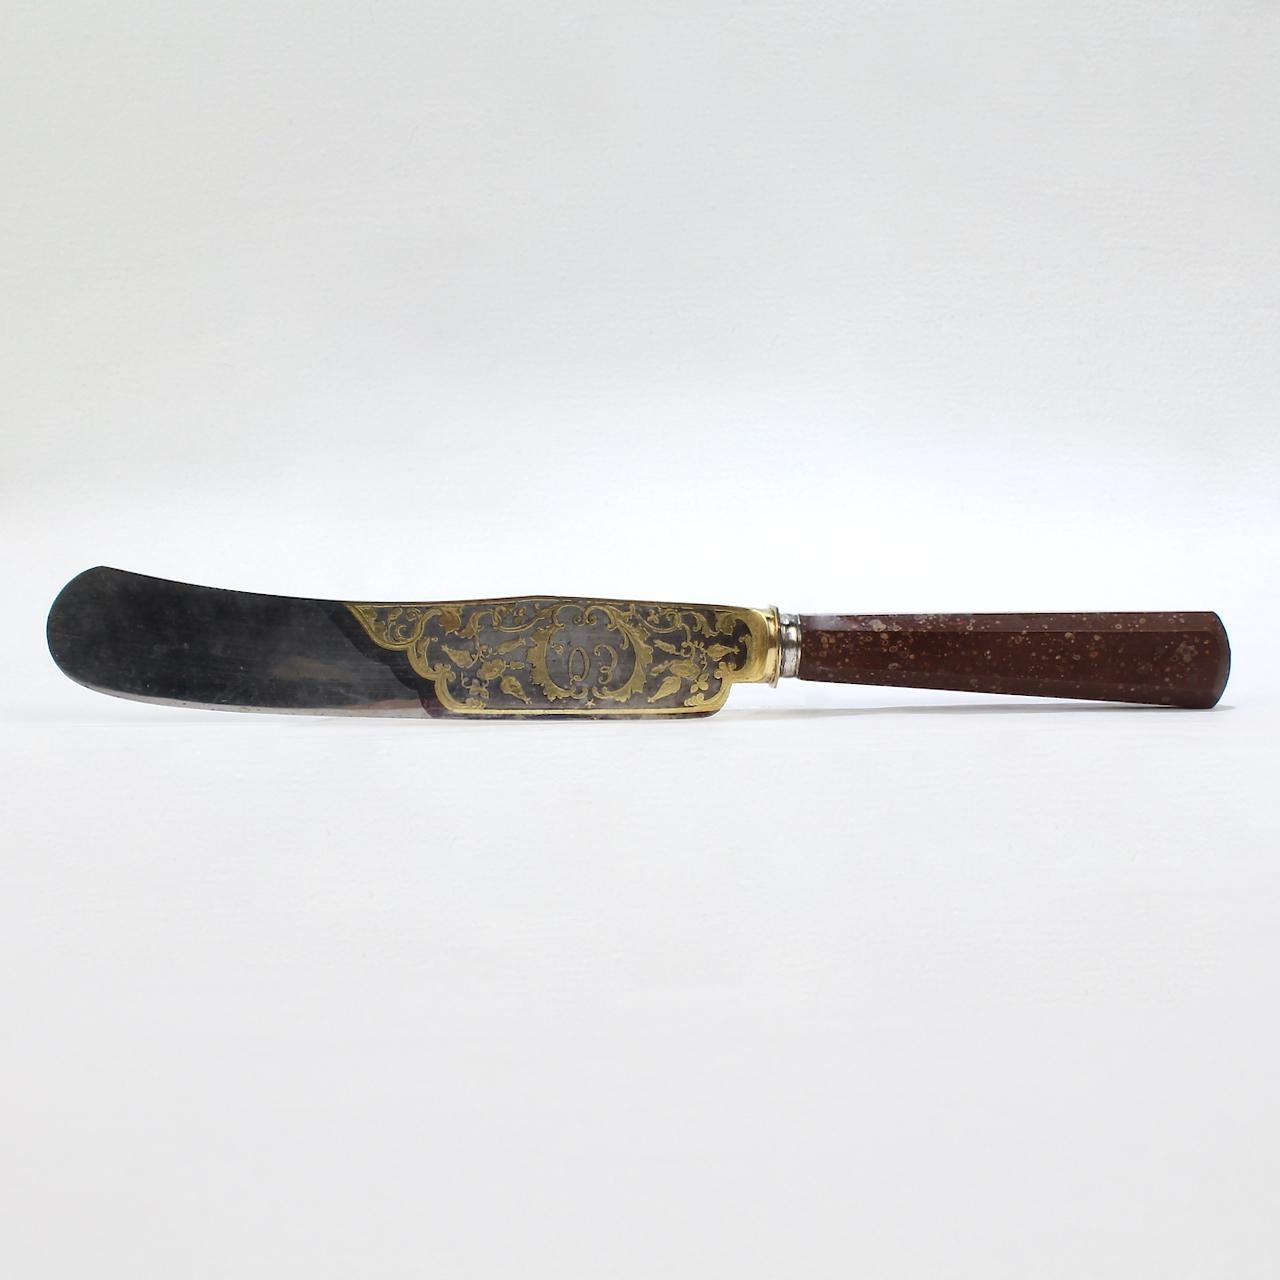 Offered here for your consideration is a very fine antique porphyry handled knife.

With a silver-plated steel knife blade set in a chamfered porphyry handle.

The blade has an acid etched and gilded hunt scene decoration on one side and a cartouche